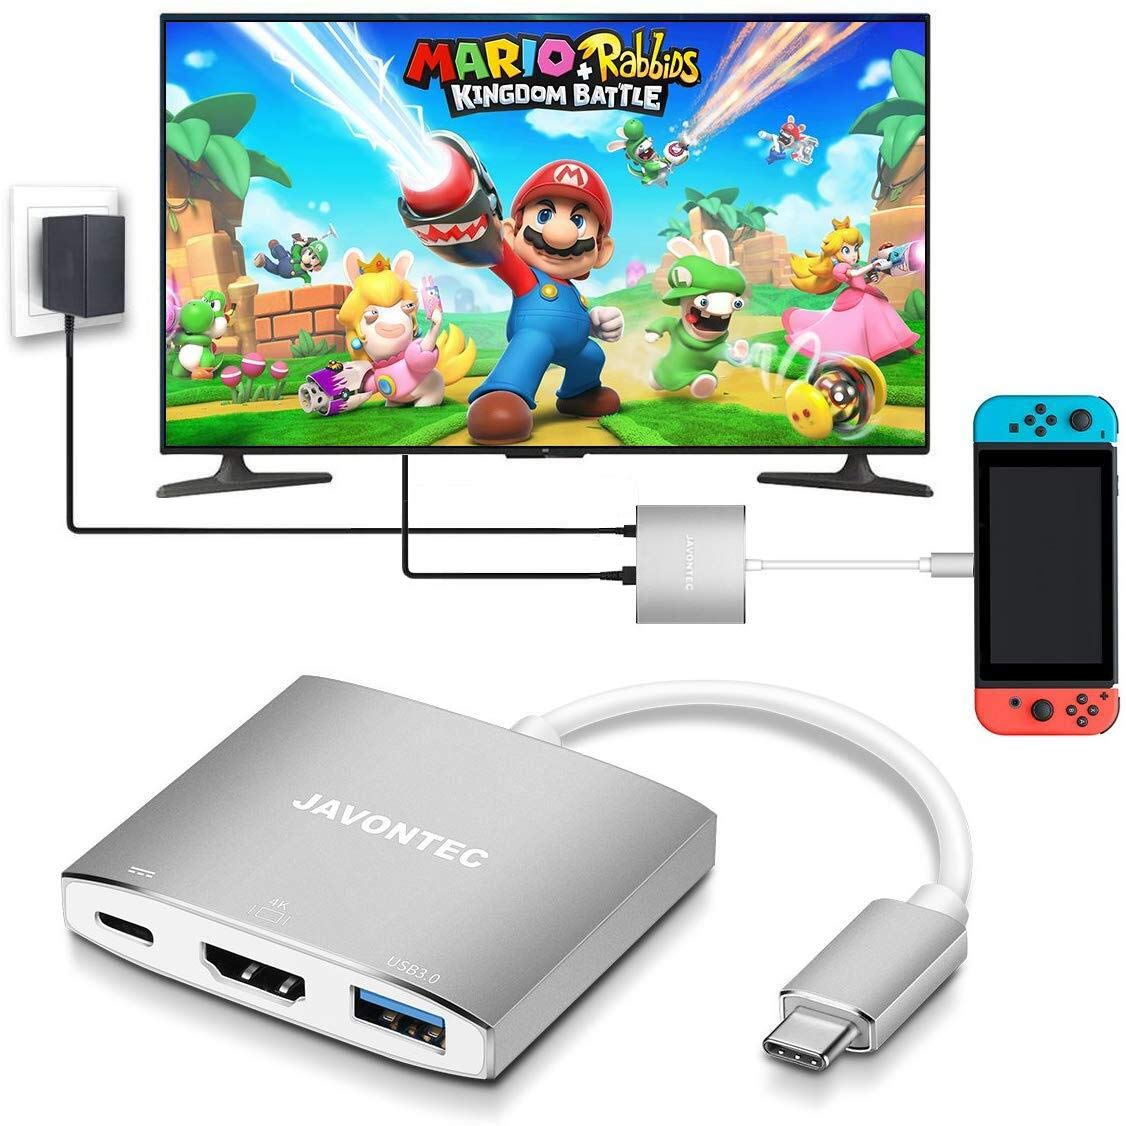 Book Cover USB C to HDMI Hub Dock for Nintendo Switch, JAVONTEC USB Type C HDMI Adapter Converter with 4K HDMI, USB 3.0, Power Delivery Compatible with, HP Spectre, Samsung S8/S9, Silver